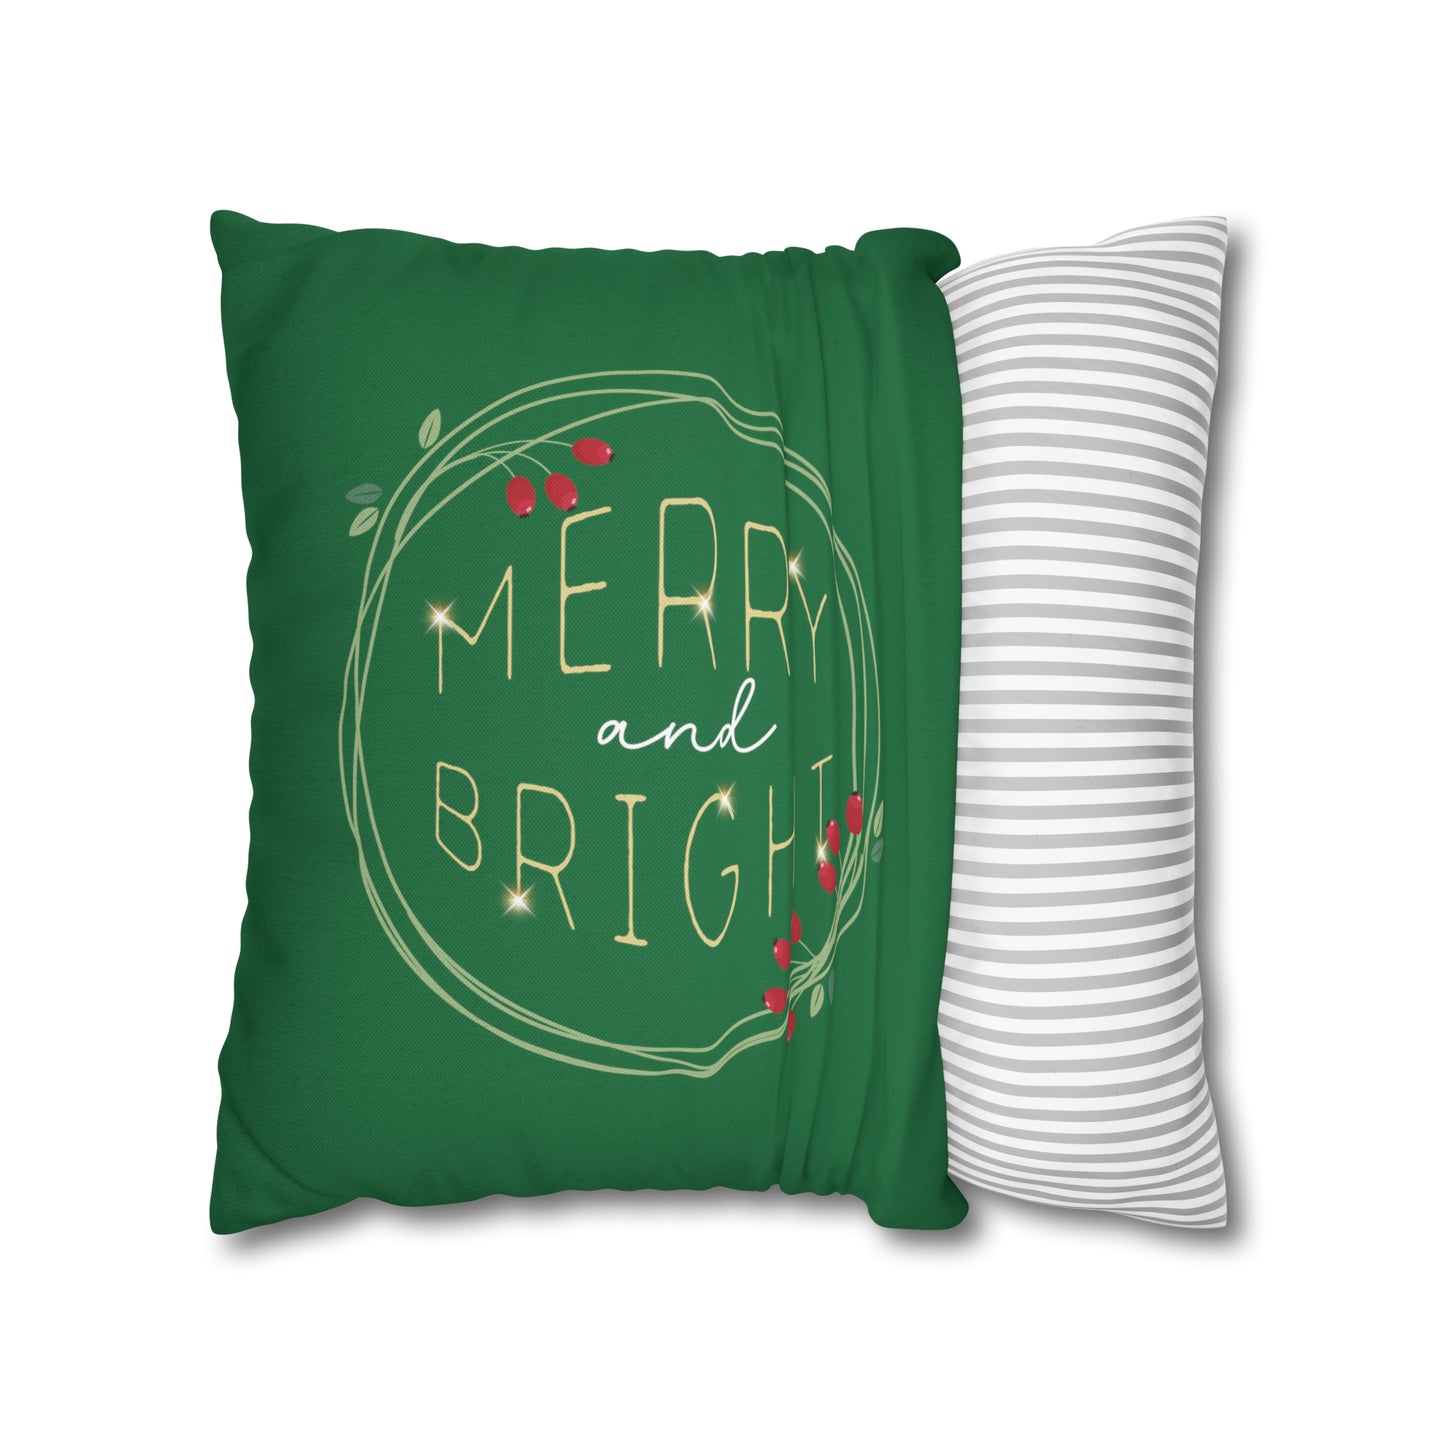 "Merry & Bright" Christmas Pillow Cover, Green